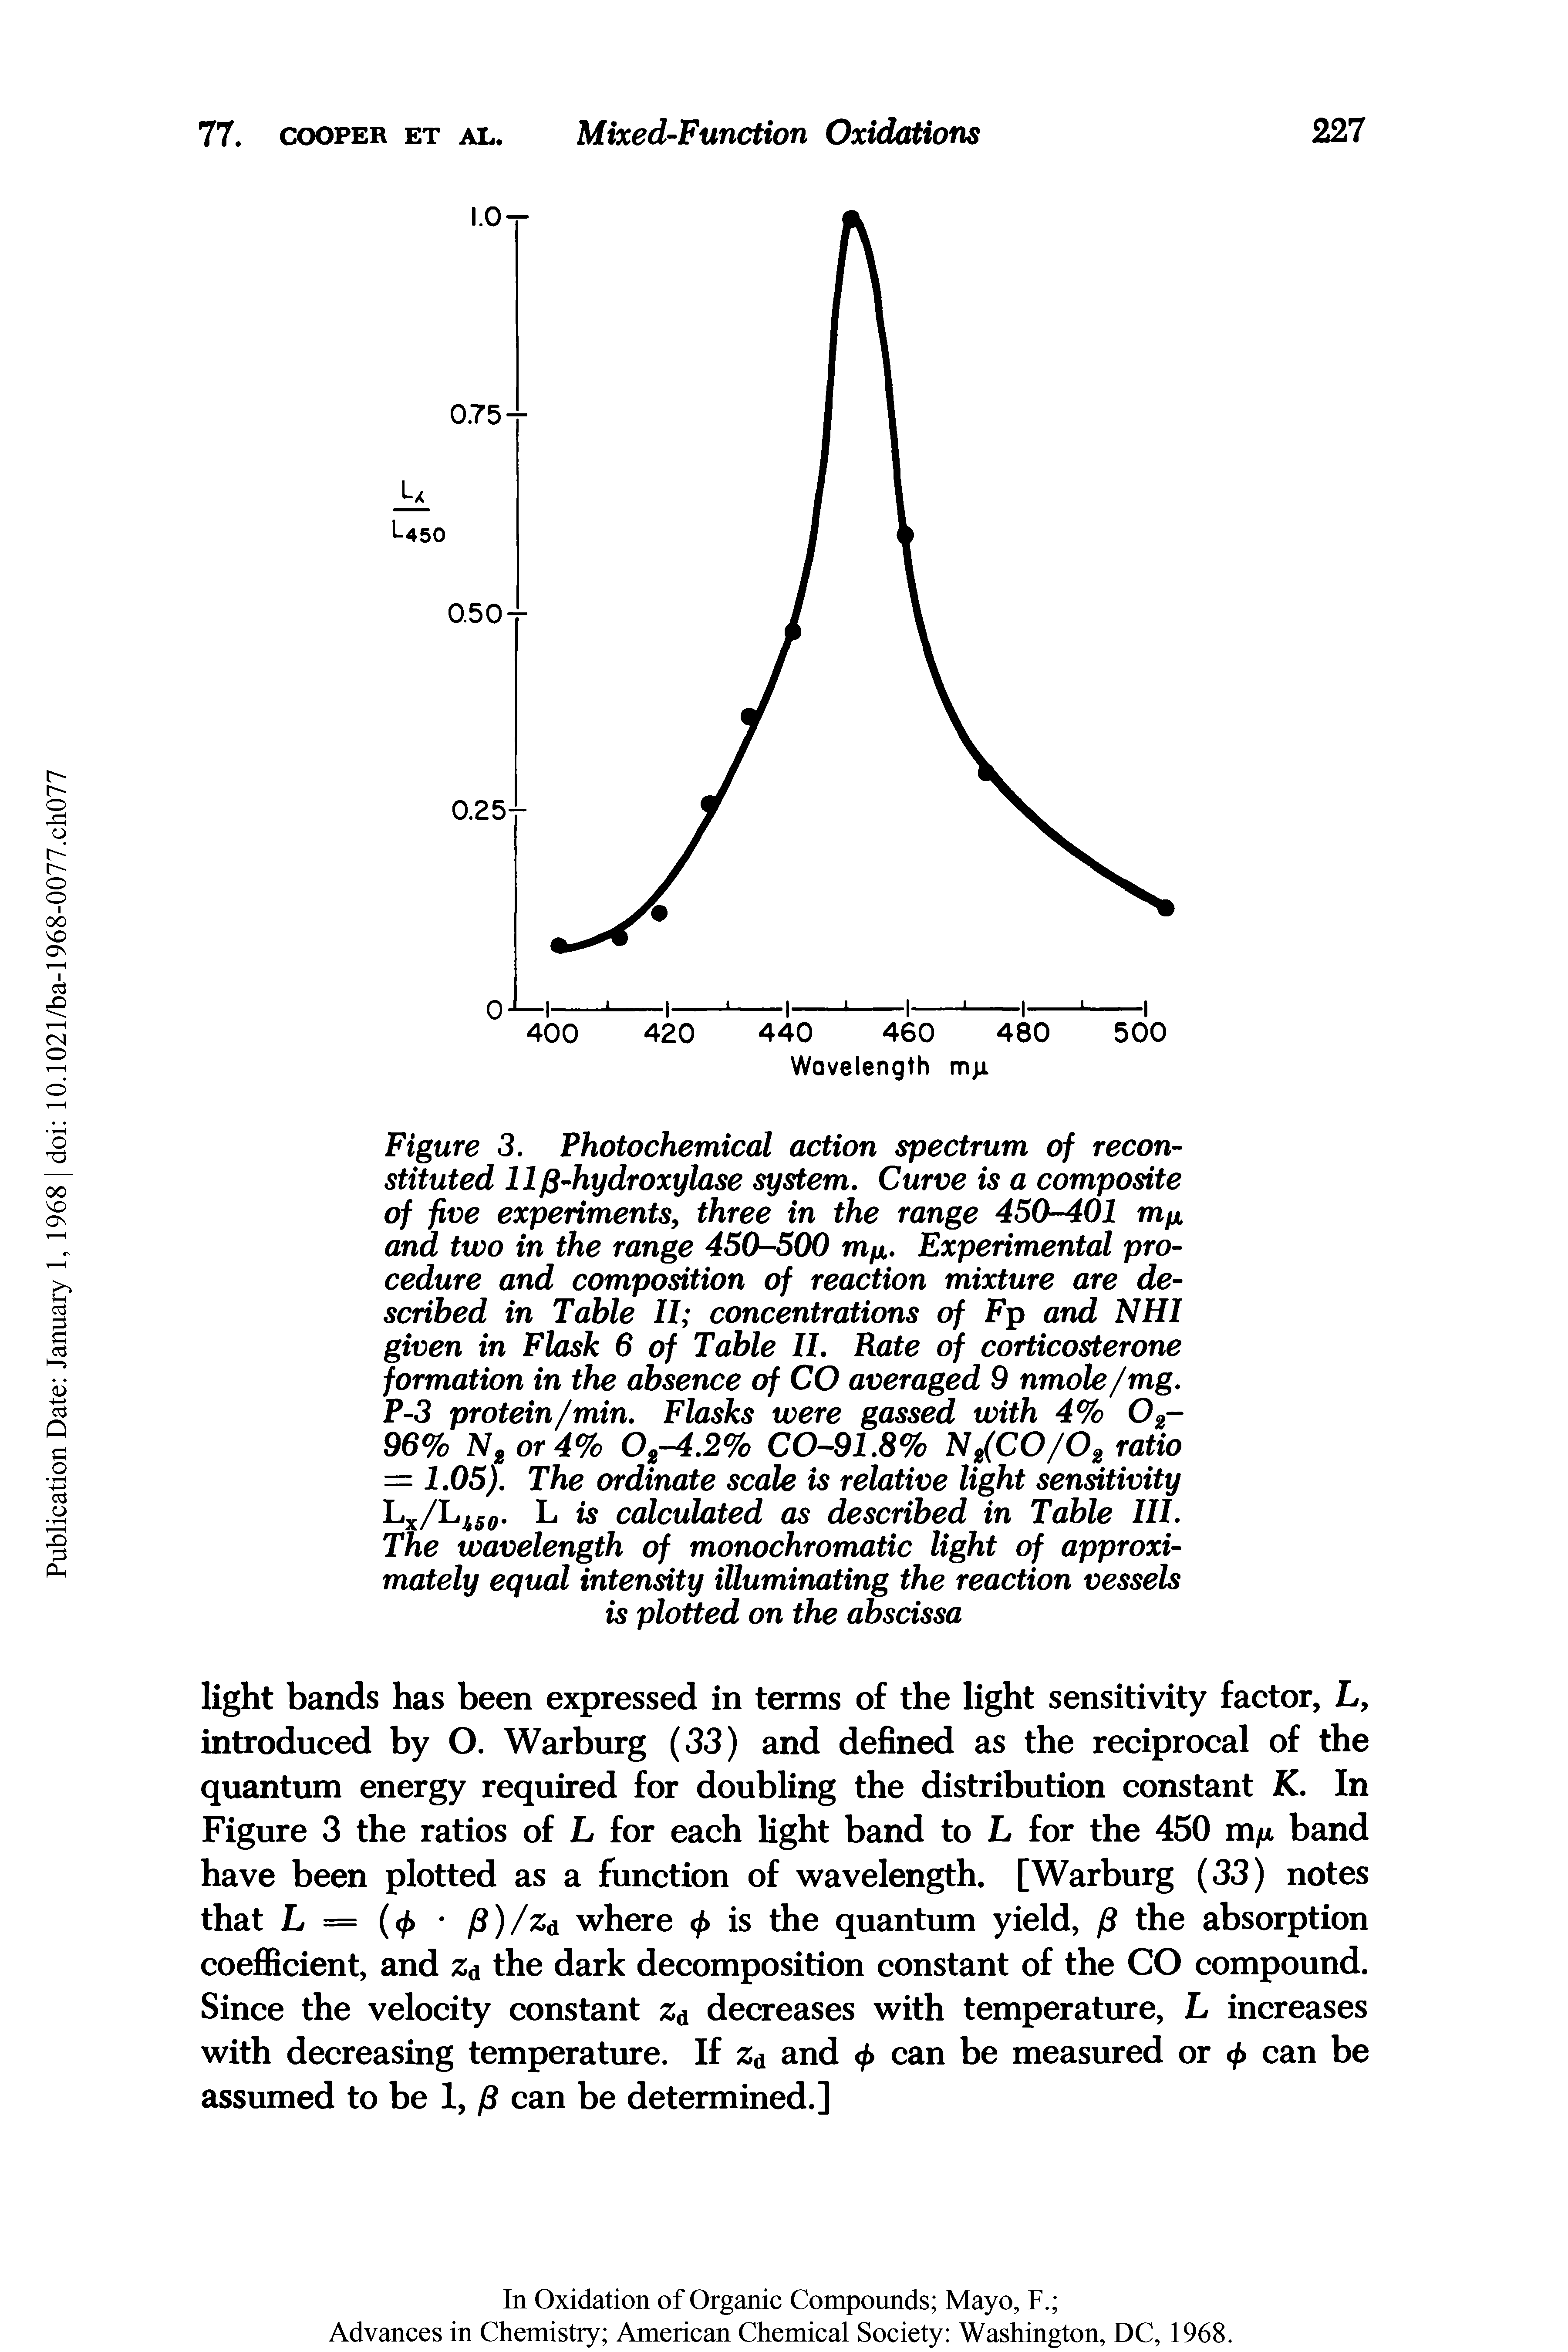 Figure 3. Photochemical action spectrum of reconstituted llp-hydroxylase system. Curve is a composite of five experiments, three in the range 450-401 mfx and two in the range 450-500 mfx. Experimental procedure and composition of reaction mixture are described in Table 11 concentrations of Fp and NHI given in Flask 6 of Table II. Rate of corticosterone formation in the absence of CO averaged 9 nmole/mg. P-3 protein/min. Flasks were gassed with 4% O2-96% Ngor4% Og-4.2% CO-91.8% N/CO/O2 ratio = 1.05). The ordinate scale is relative light sensitivity Lx/L 50. L is calculated as described in Table III. The wavelength of monochromatic light of approximately equal intensity illuminating the reaction vessels is plotted on the abscissa...